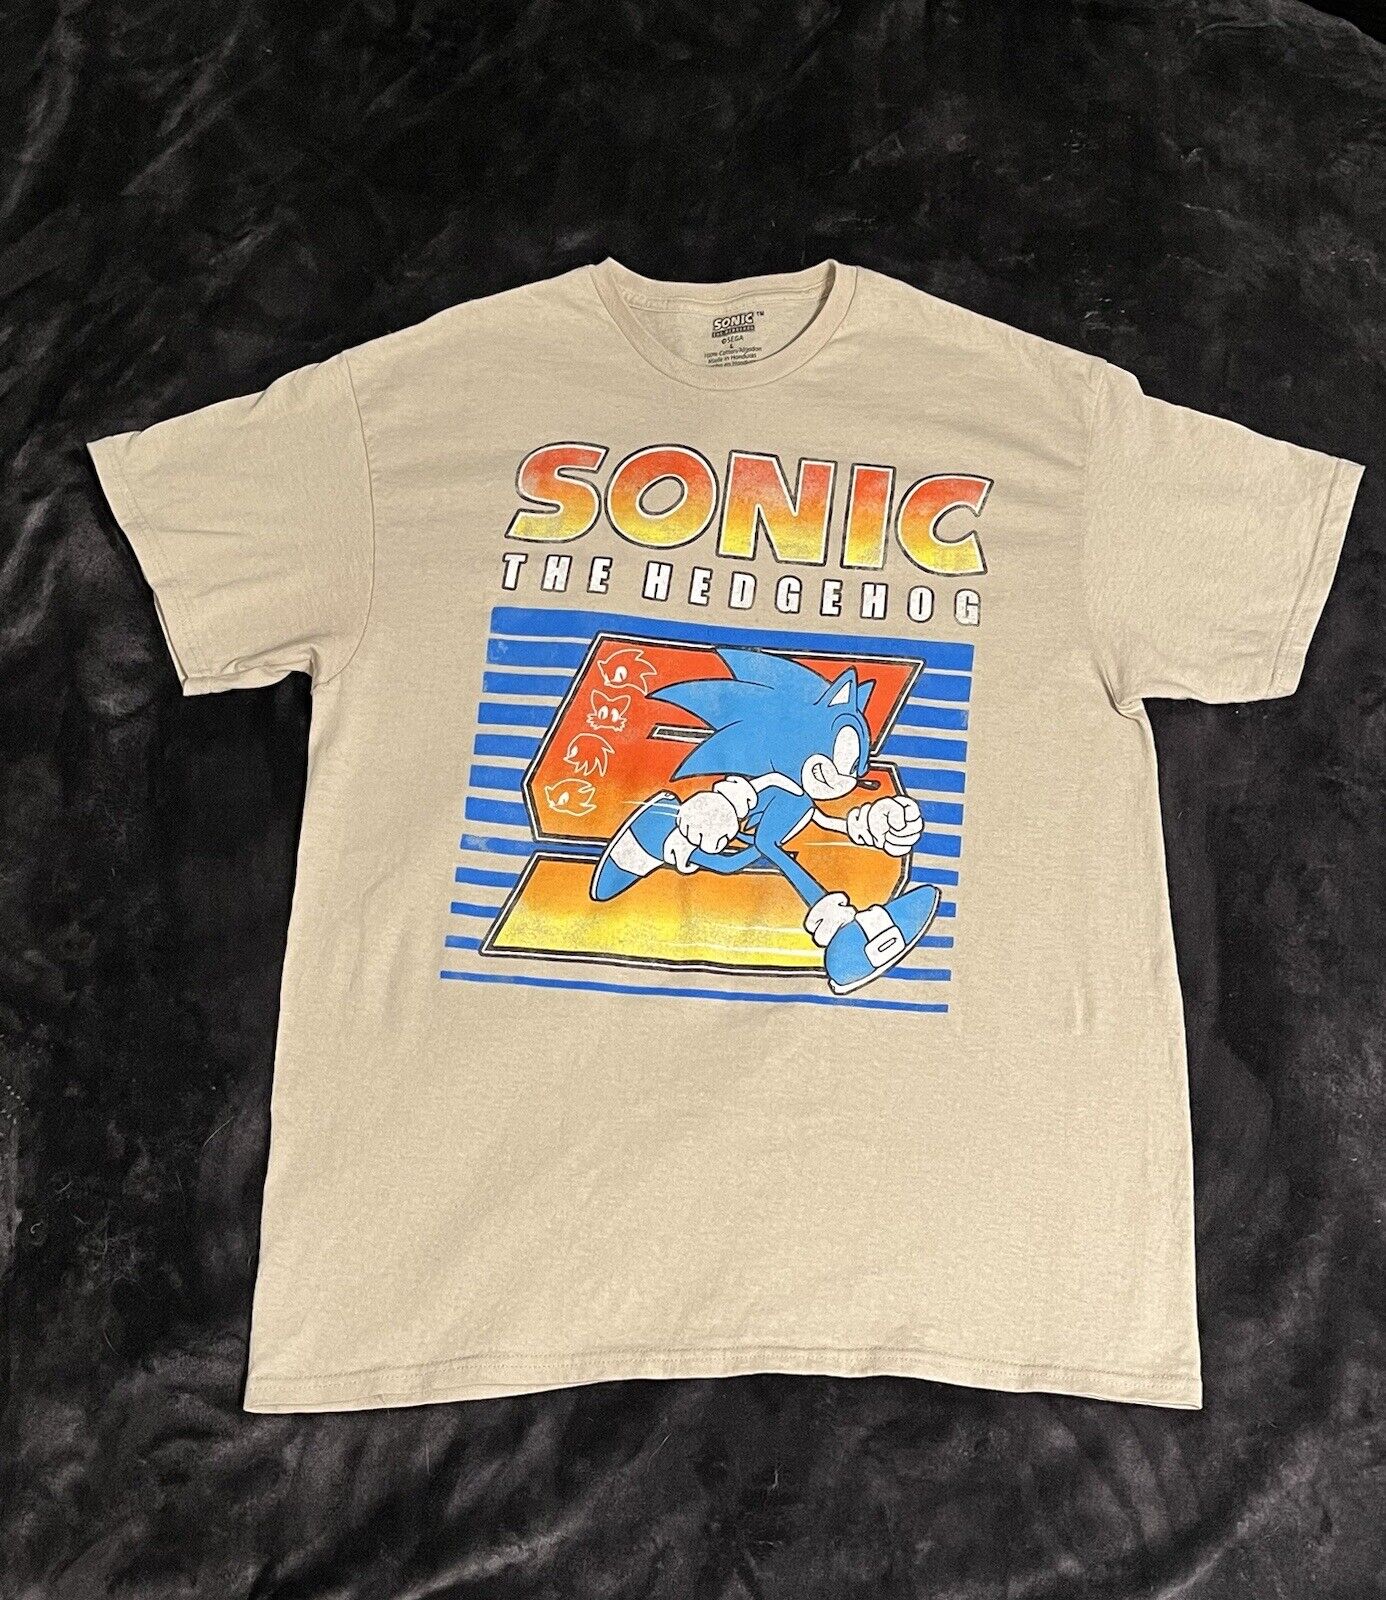 Men’s Rare vintage sonic the hedgehog shirt Size L.  In Amazing Condition